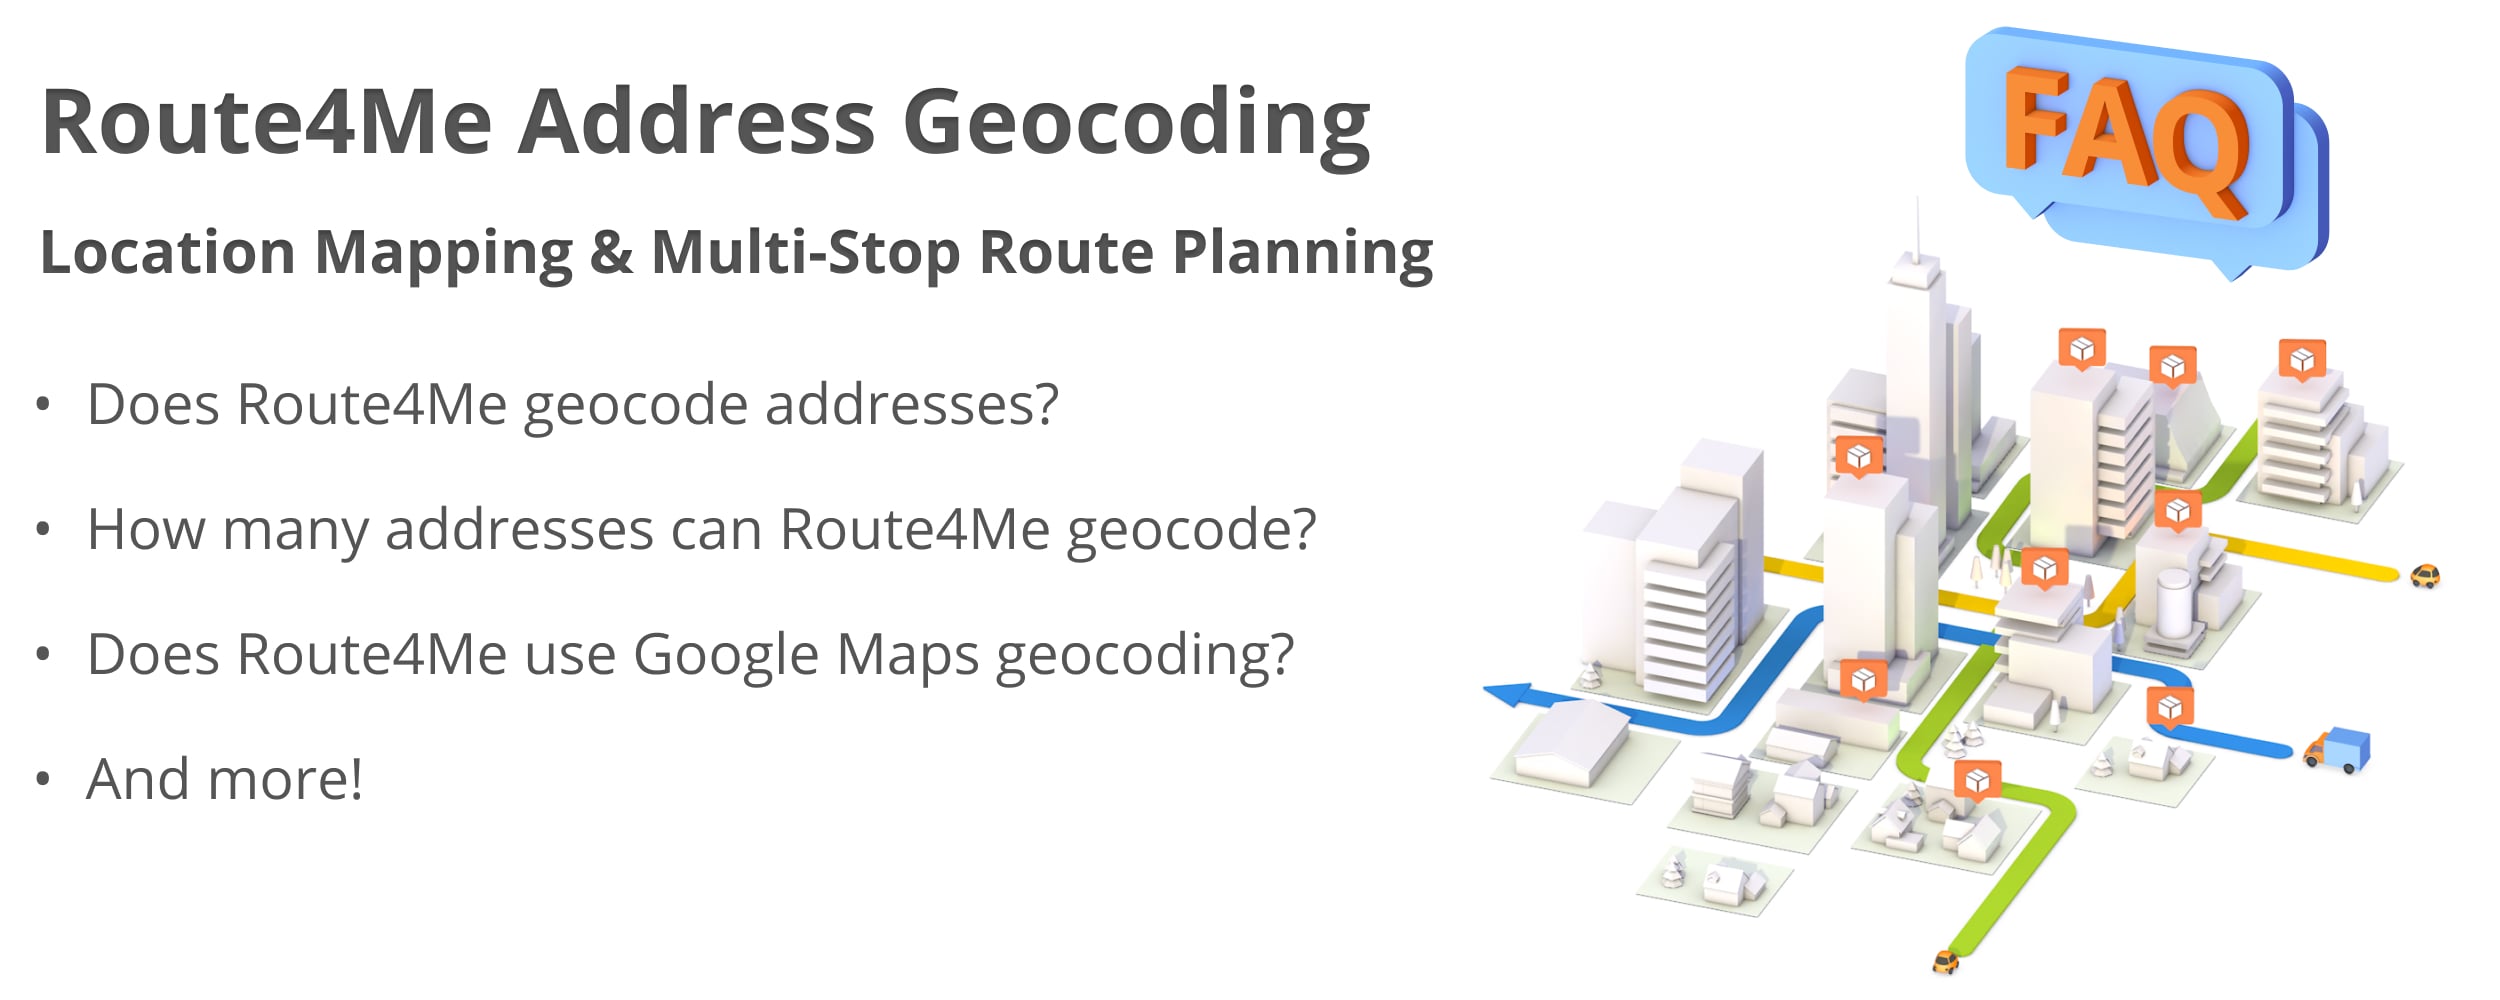 Frequently asked questions about Route4Me address geocoding and address mapping.